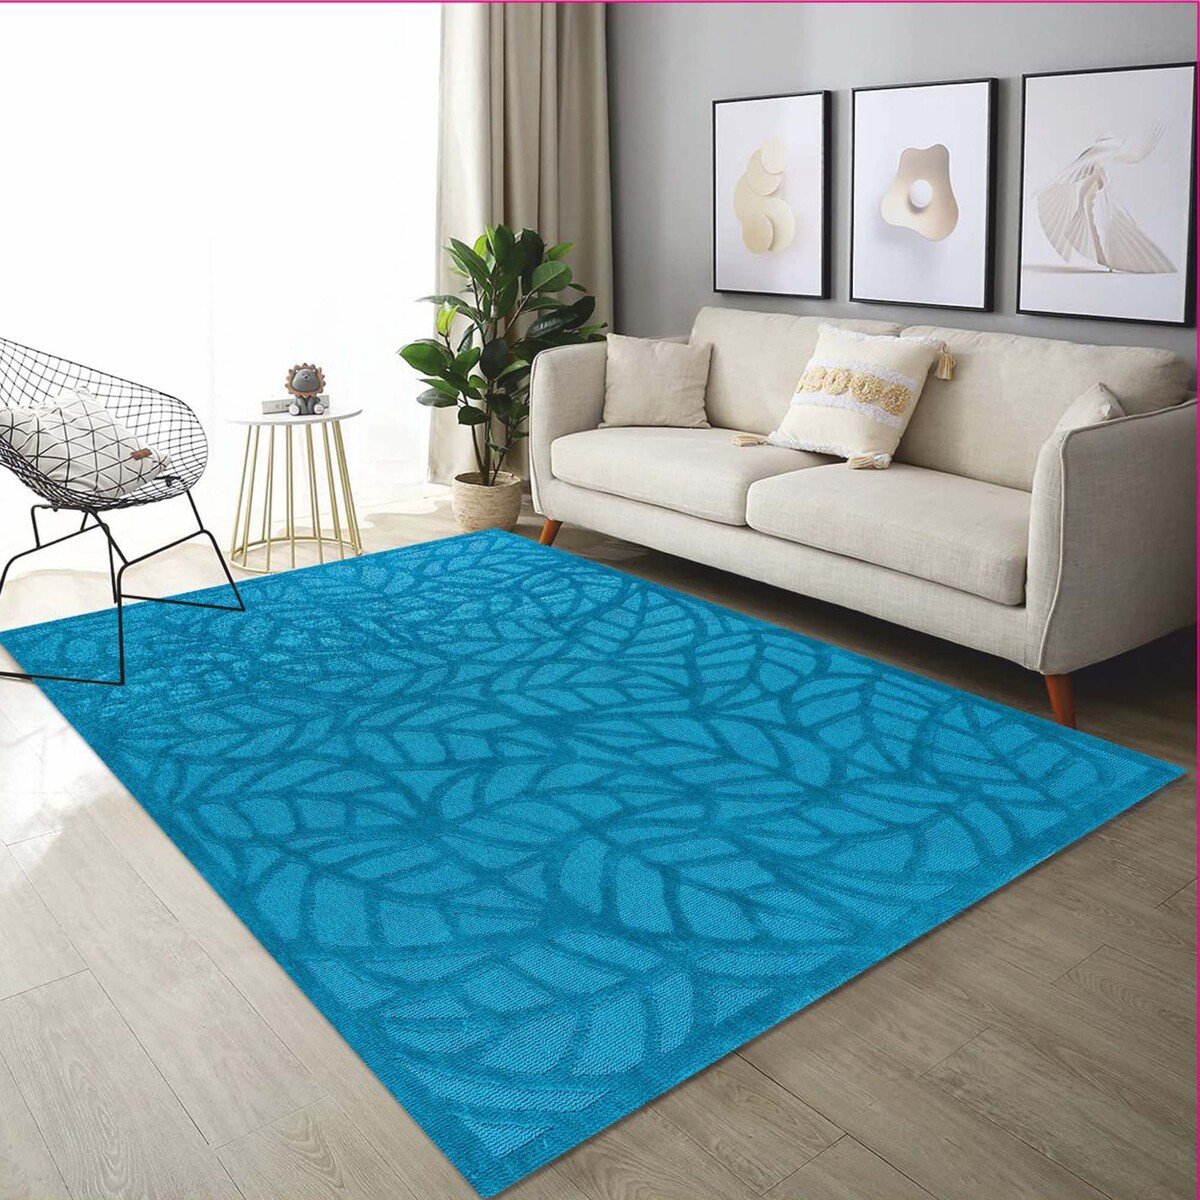 Homewell Knitted Carpet 150x220cm BHD8 Assorted